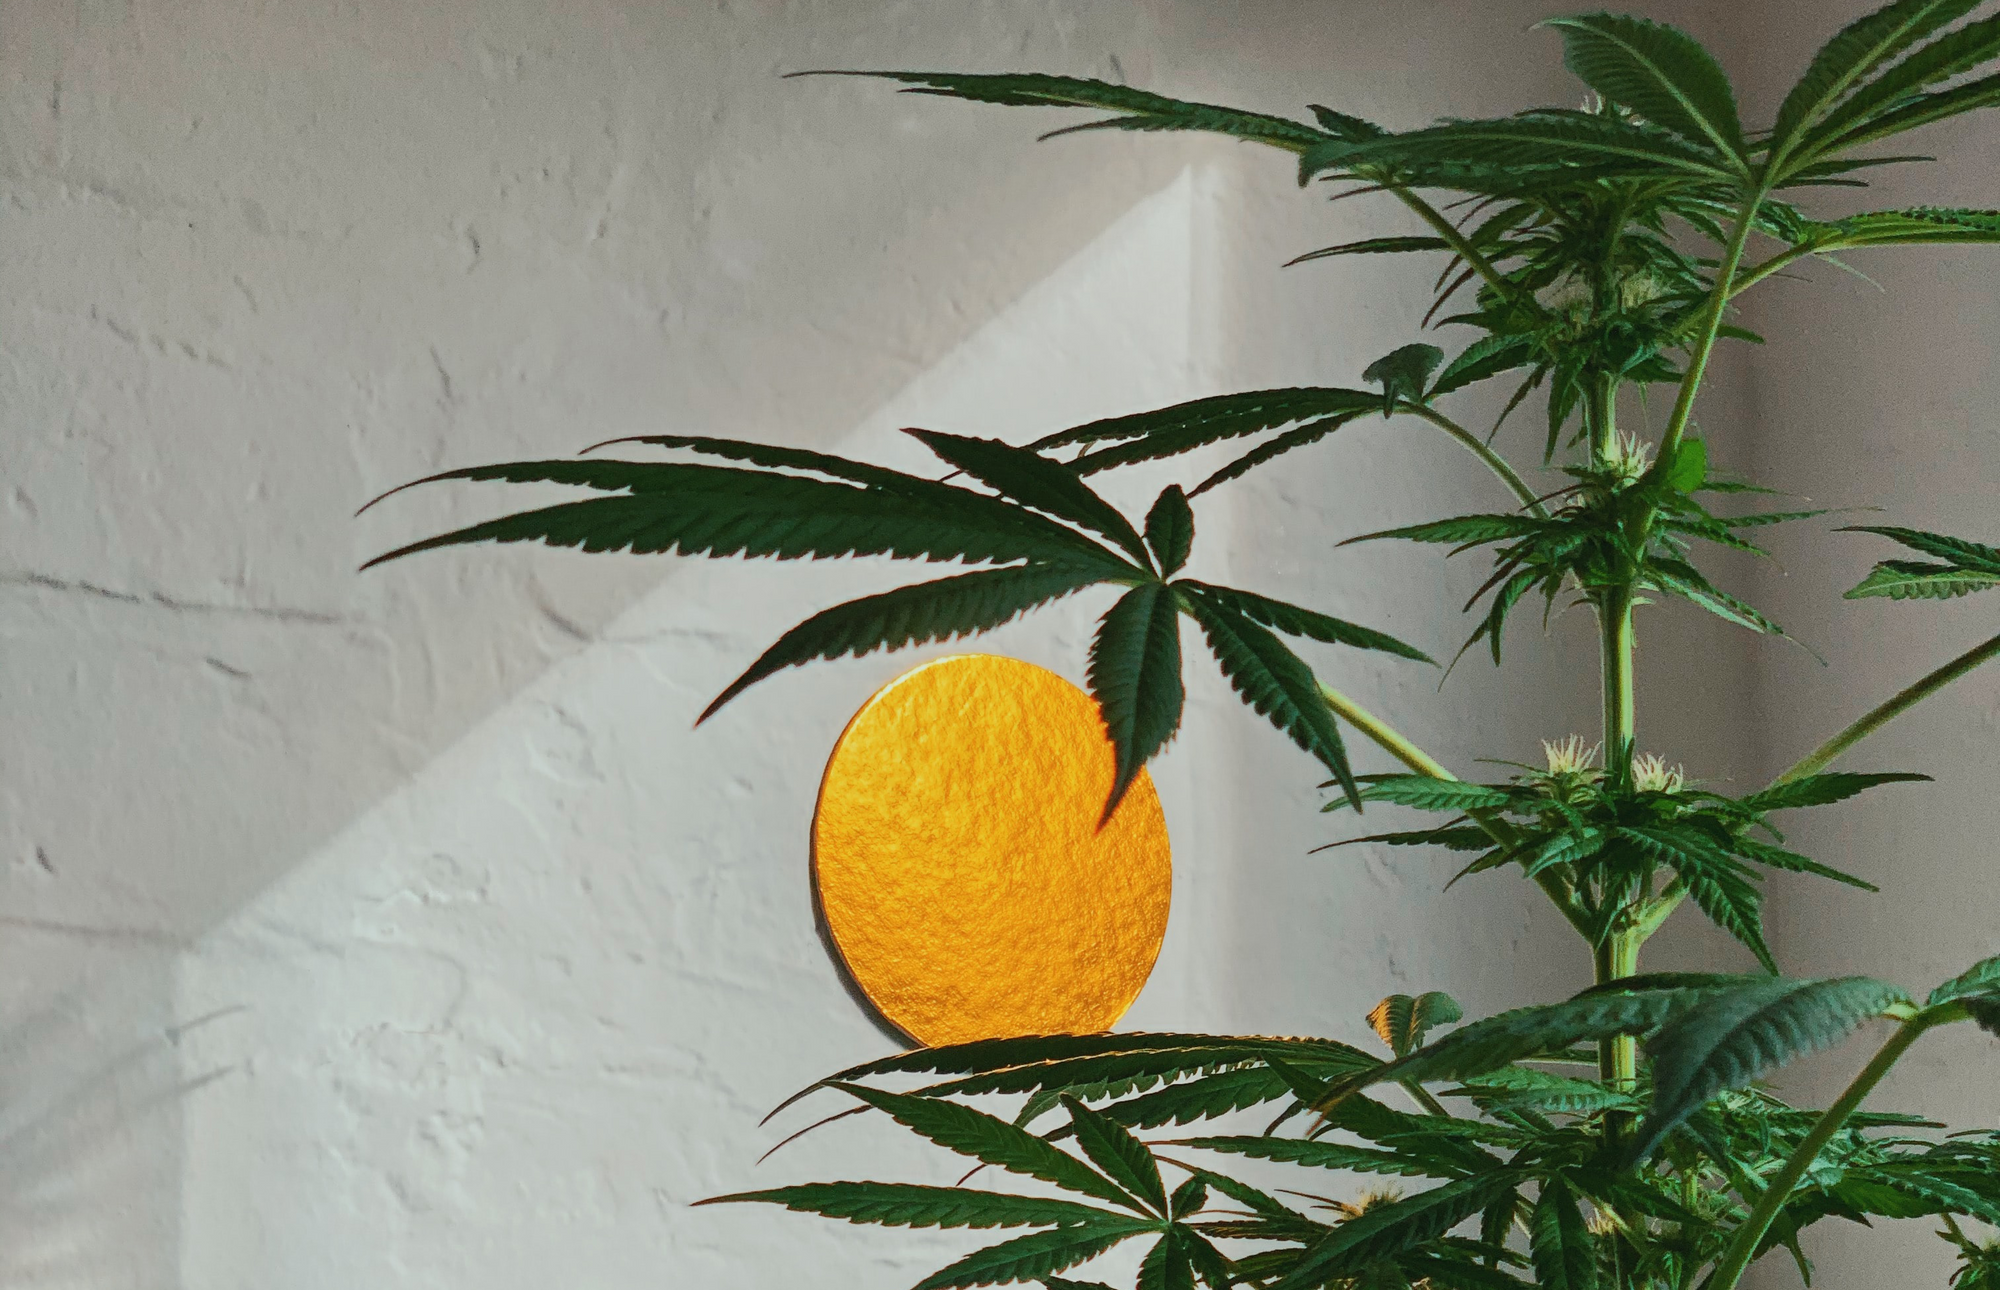 Getting ready for GMP: The future gold standard of cannabis production